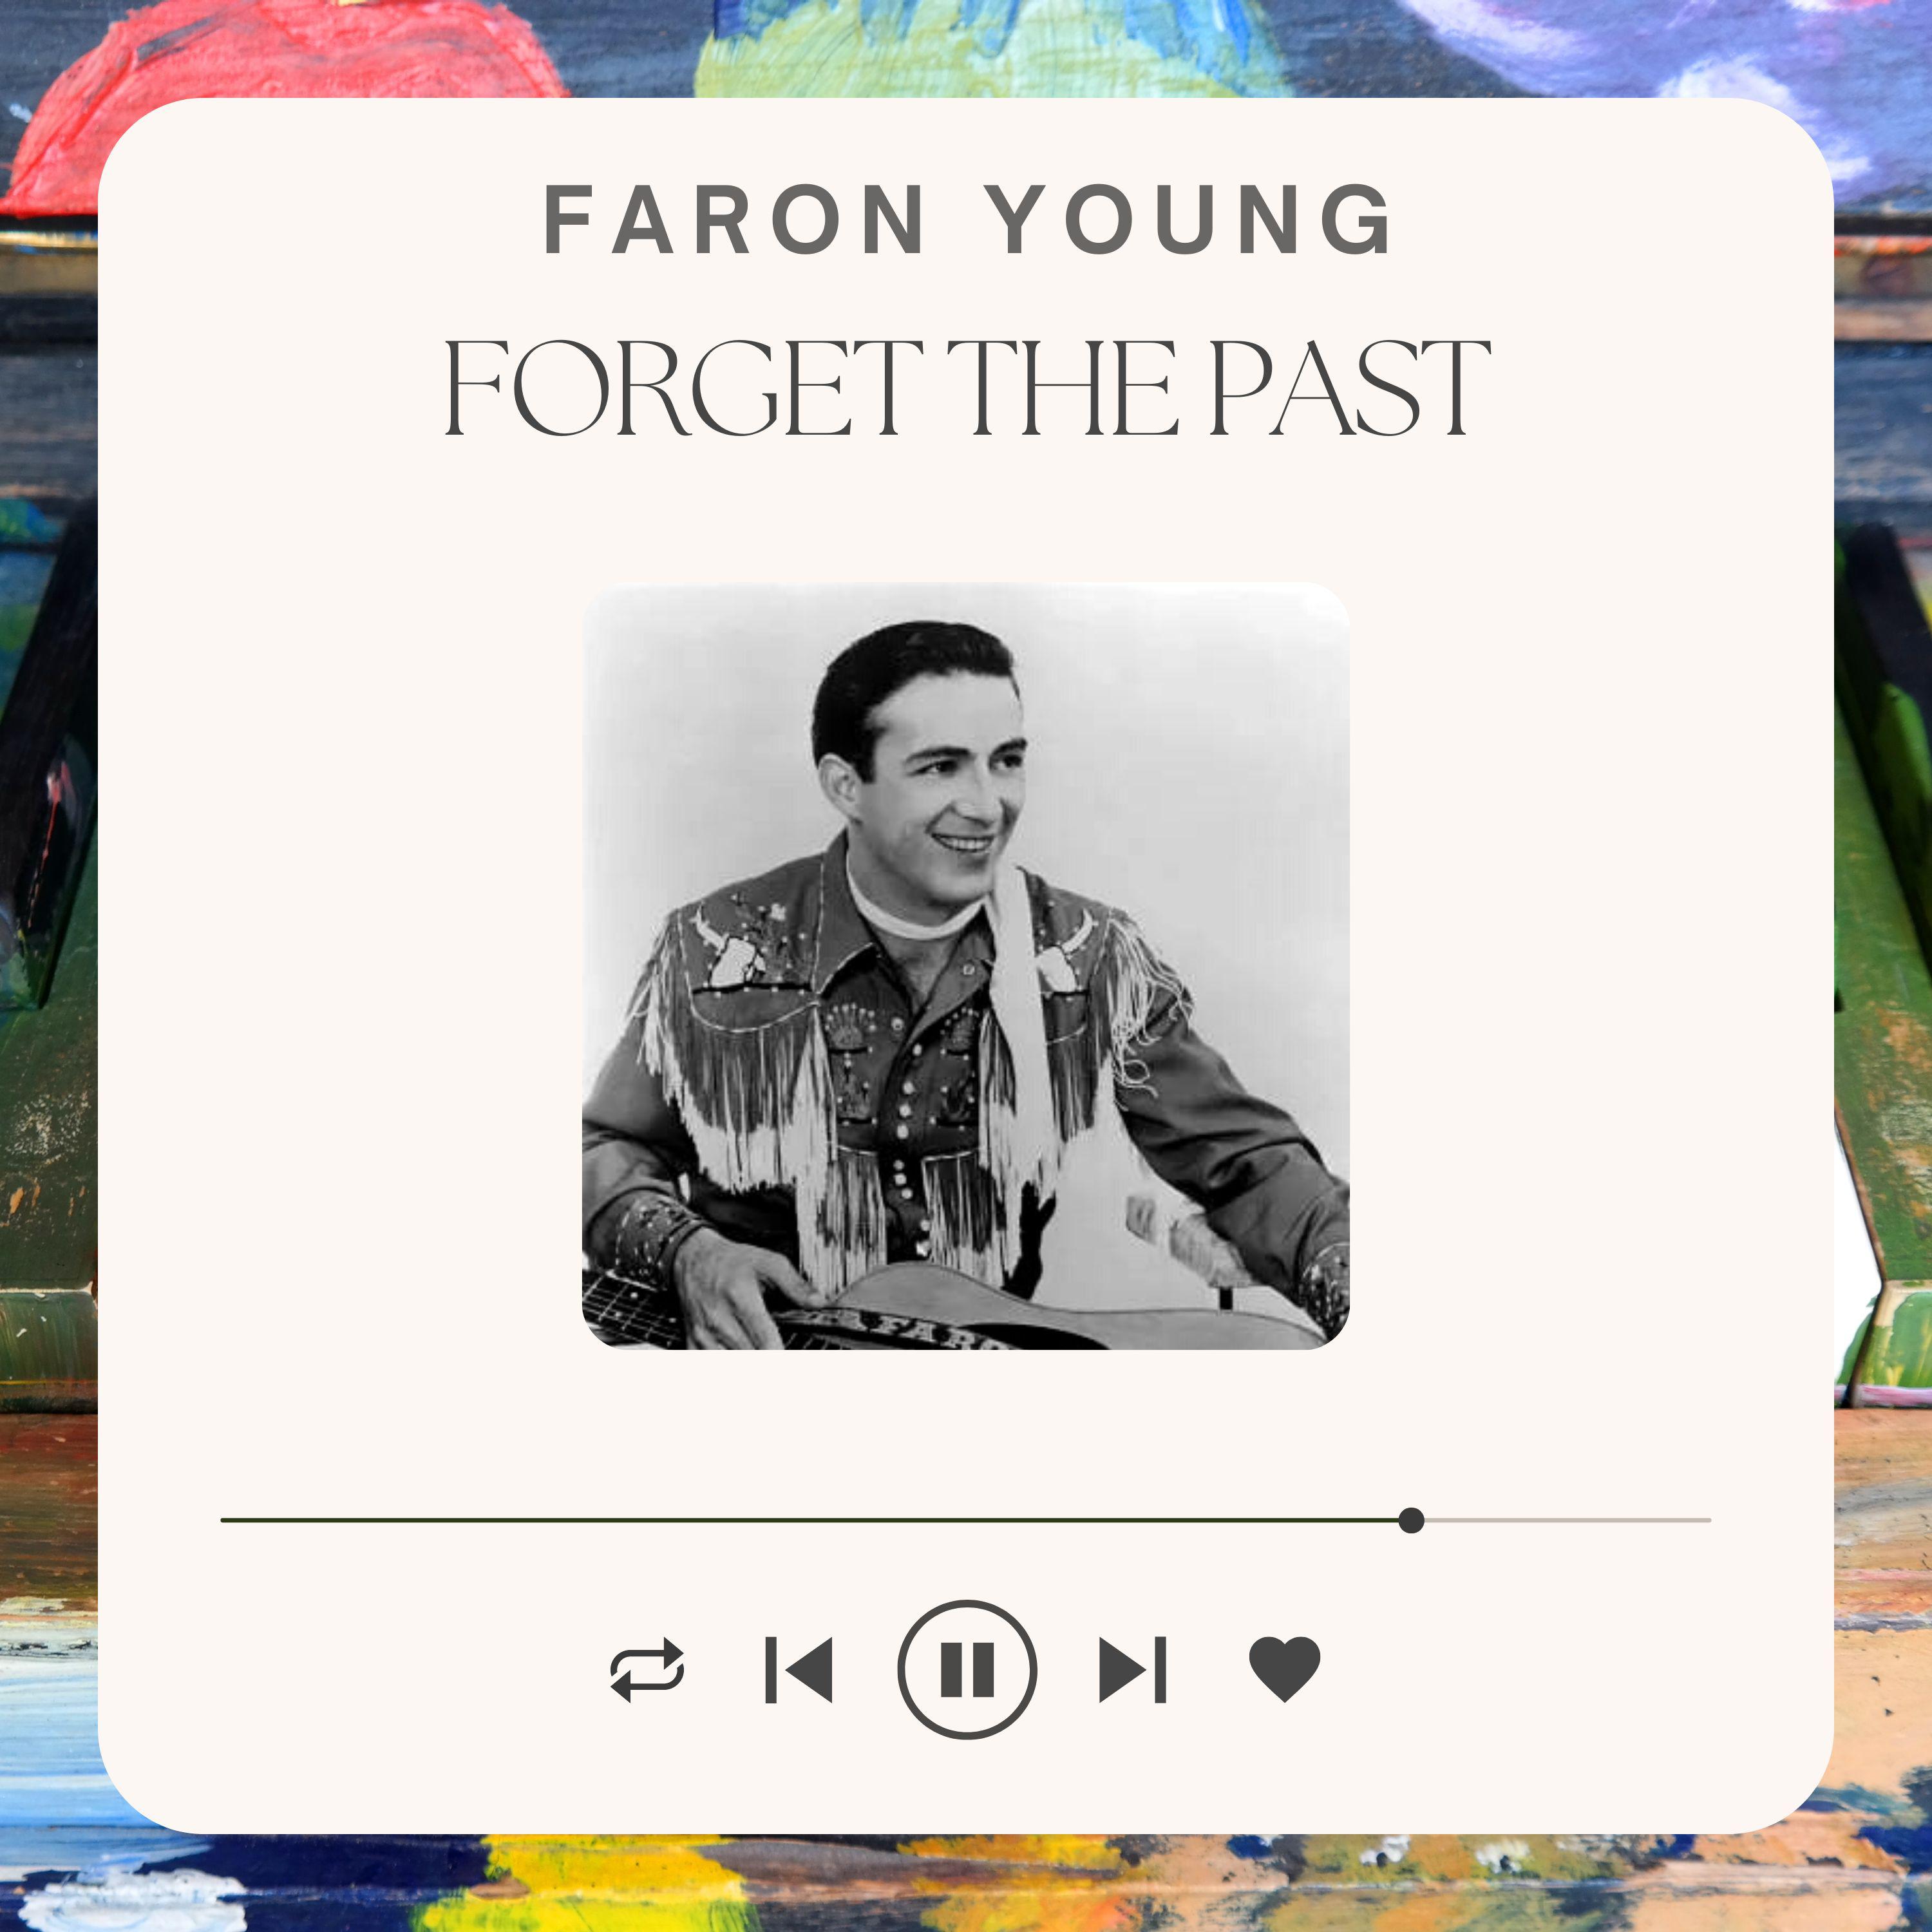 Faron Young - I'll Go On Alone